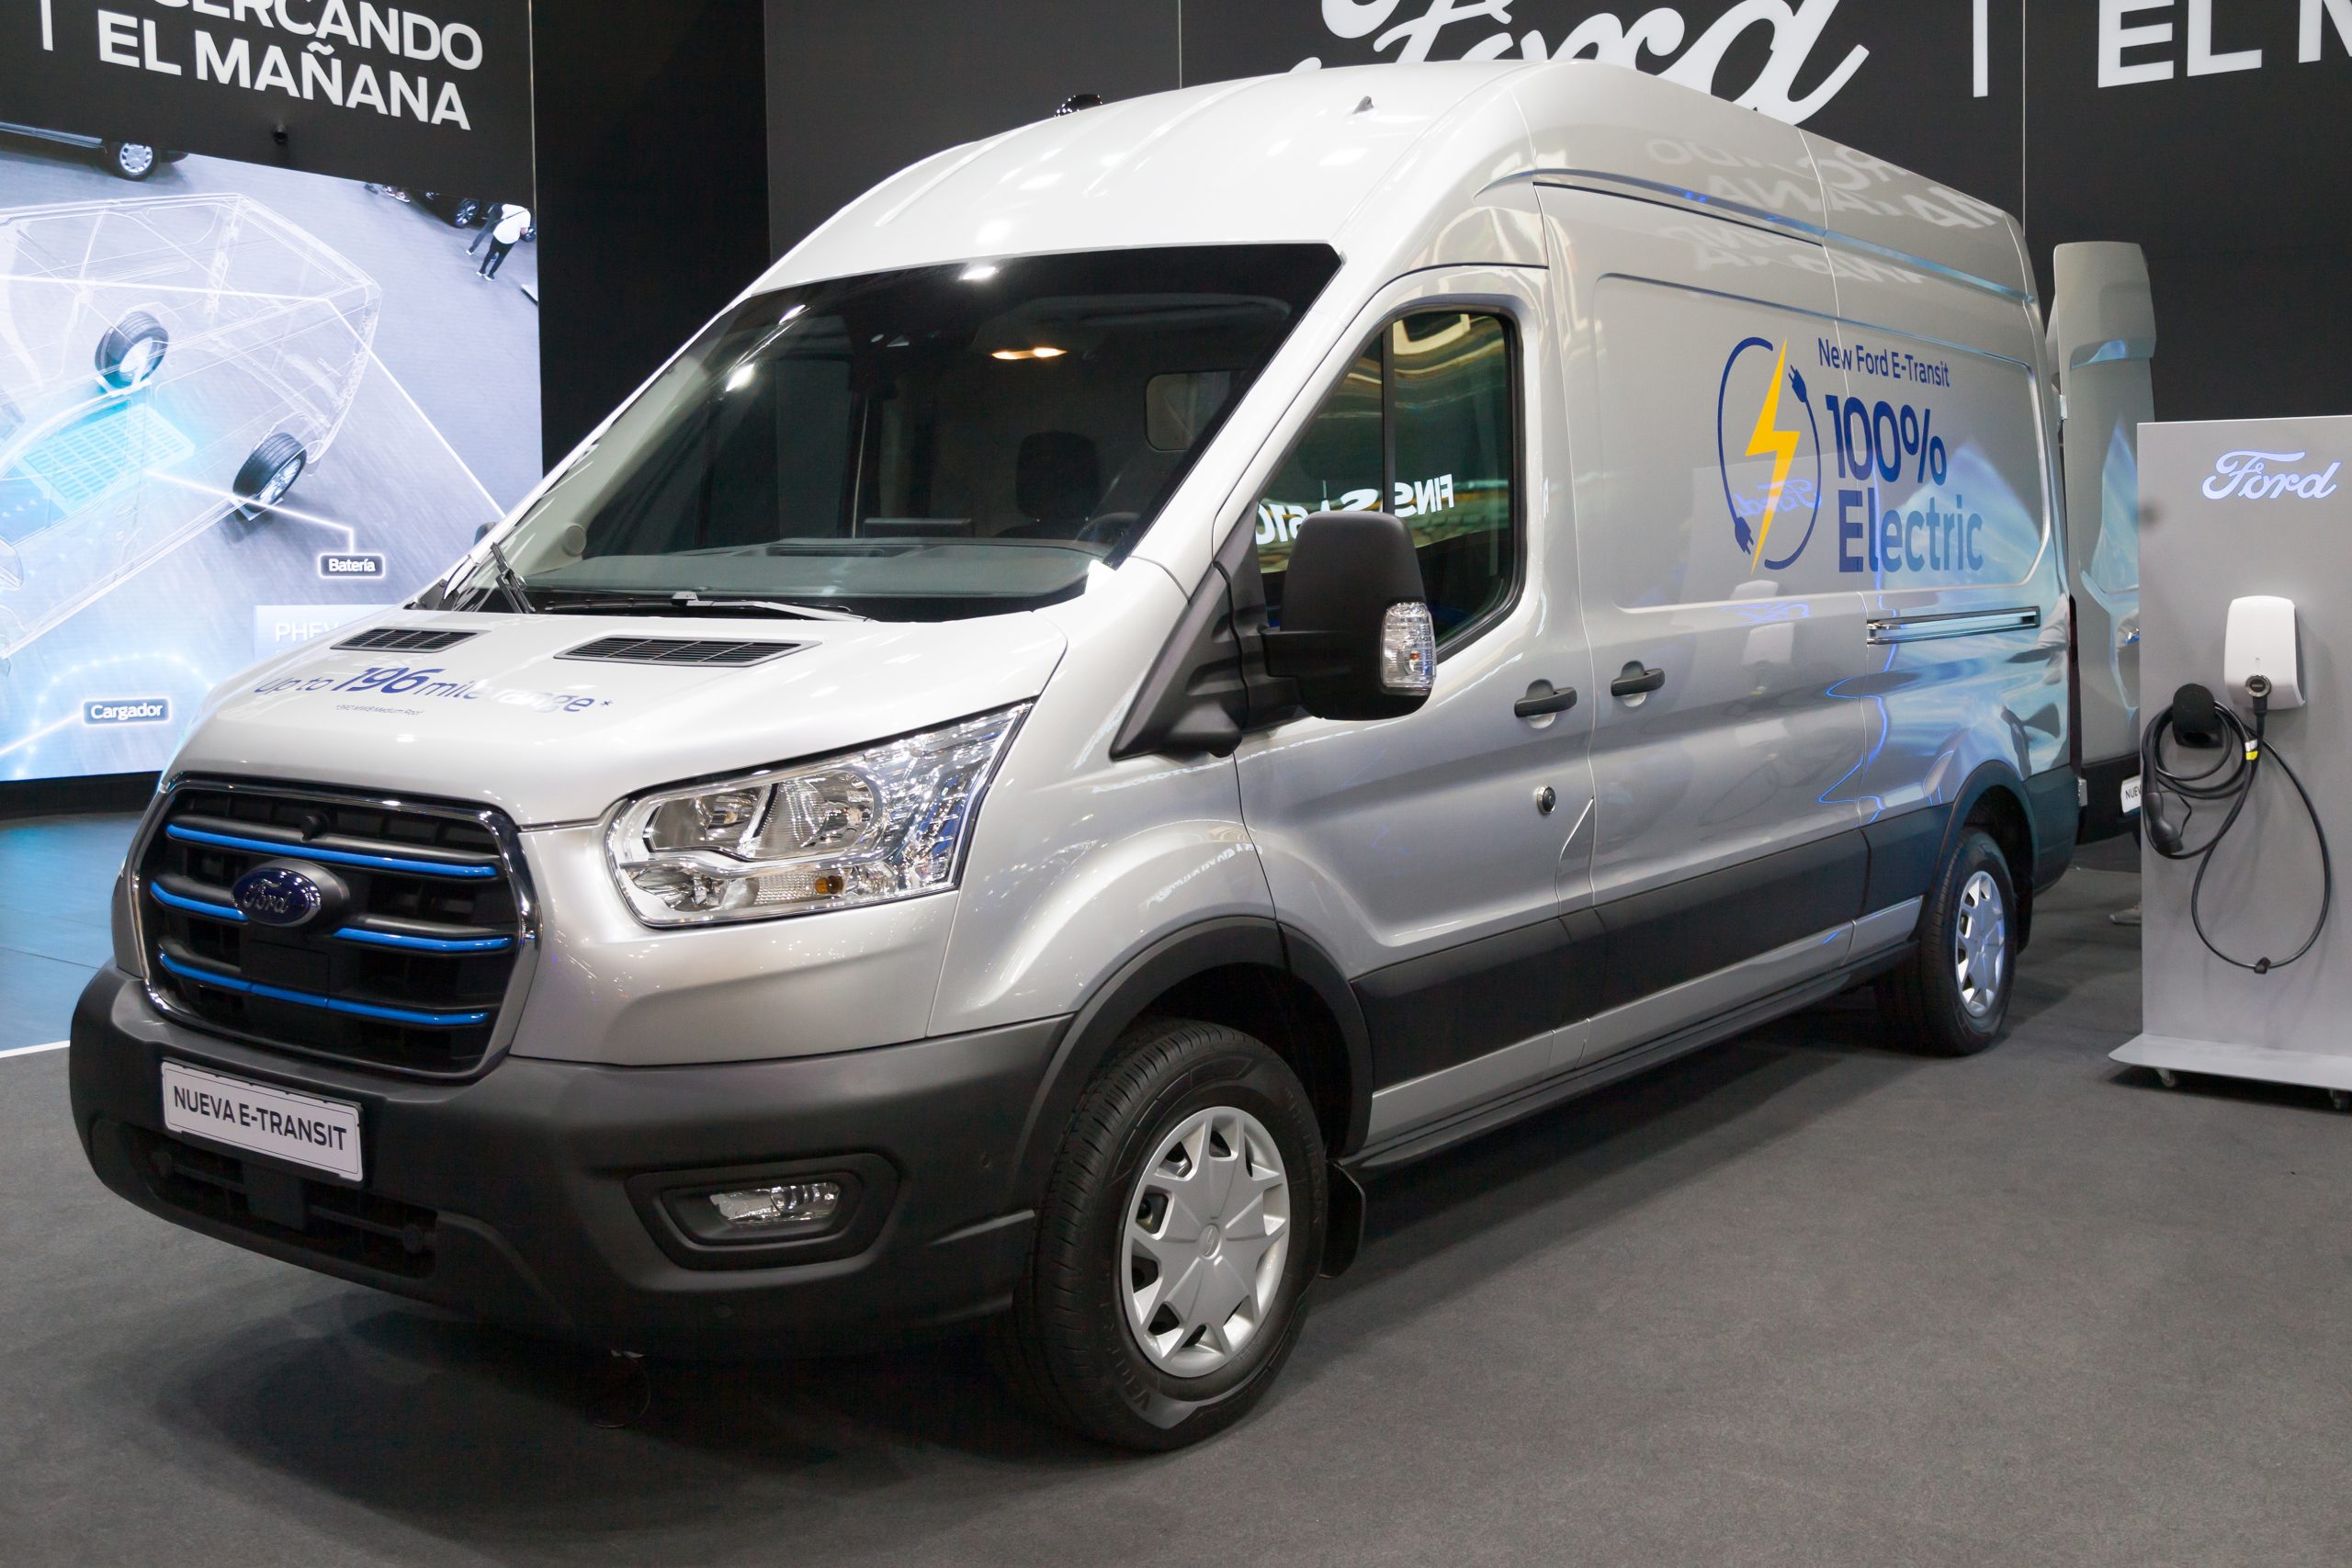 A silver Ford E-Transit van on display in a show room